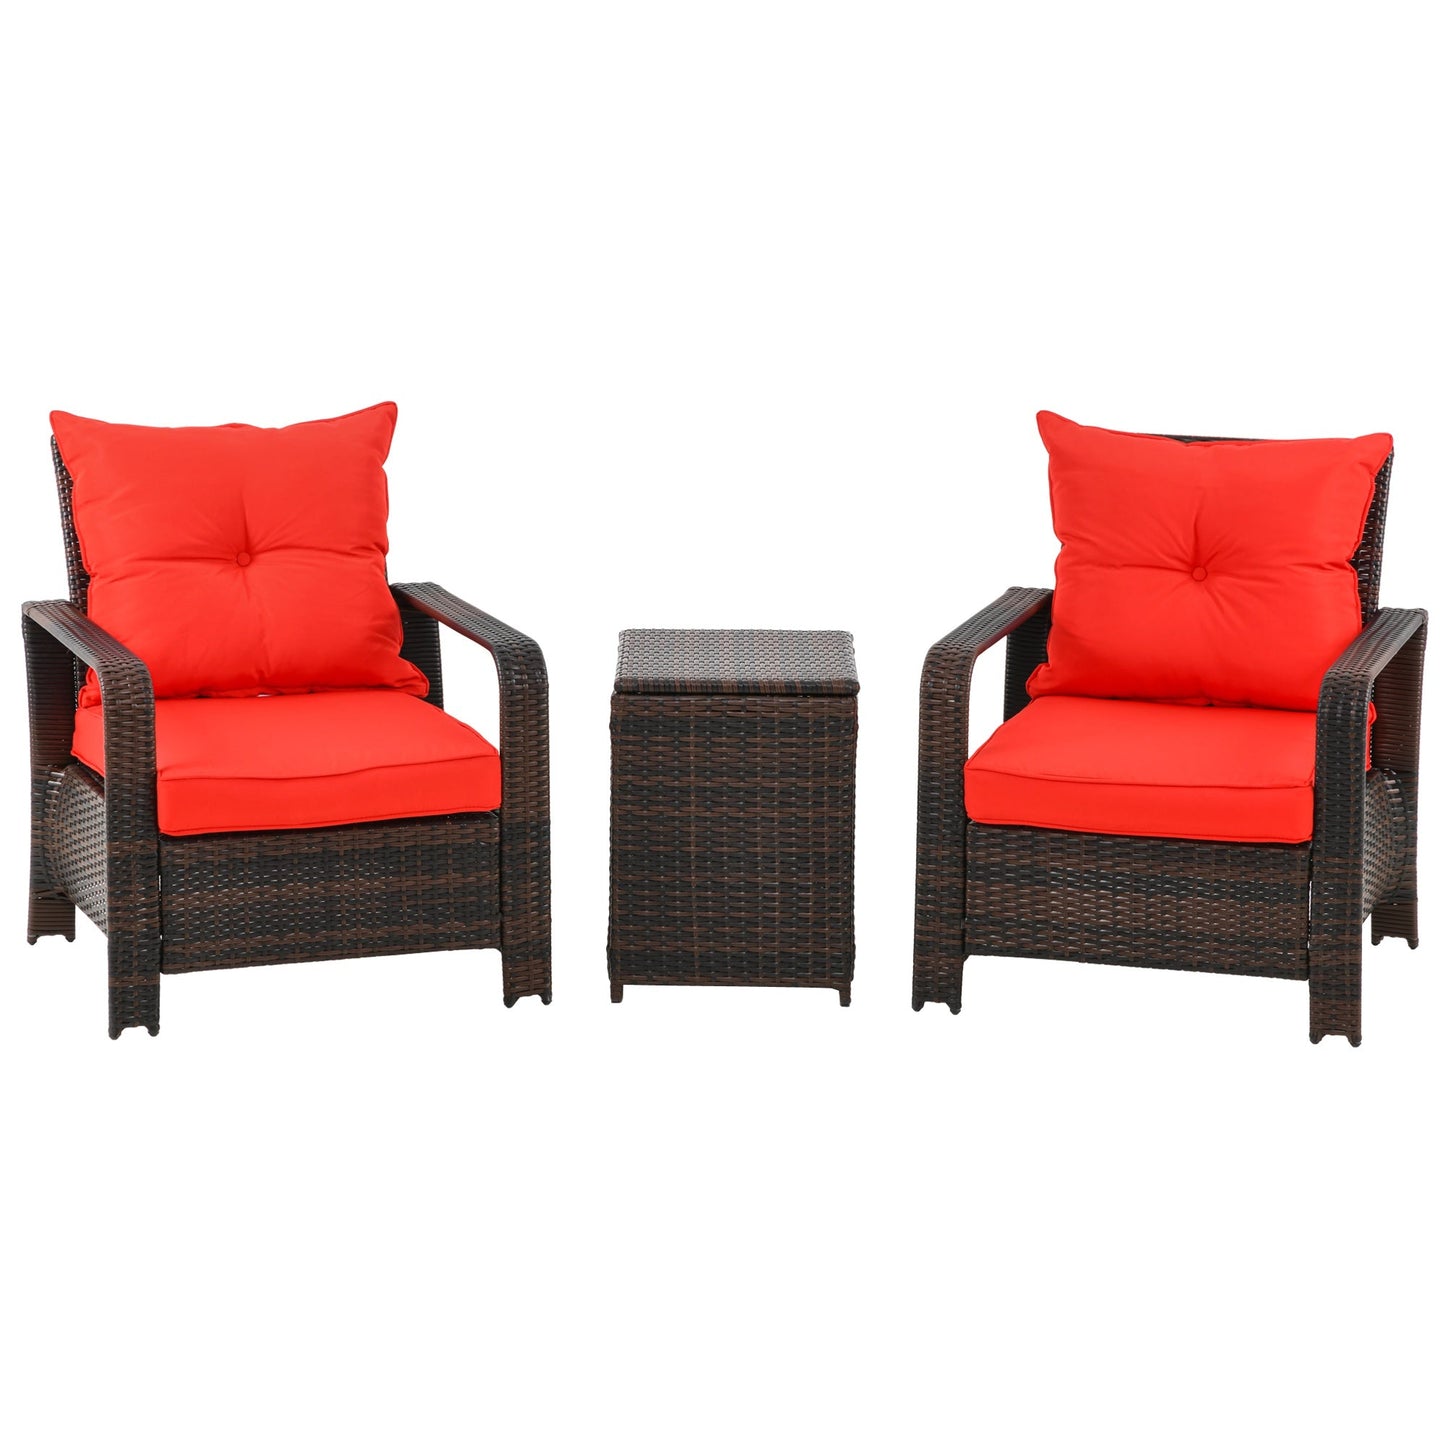 -Outsunny 3 Piece PE Rattan Patio Chairs Porch Furniture Set with 2 Chairs Padded Seats & 1 Side Table with Storage, Red - Outdoor Style Company